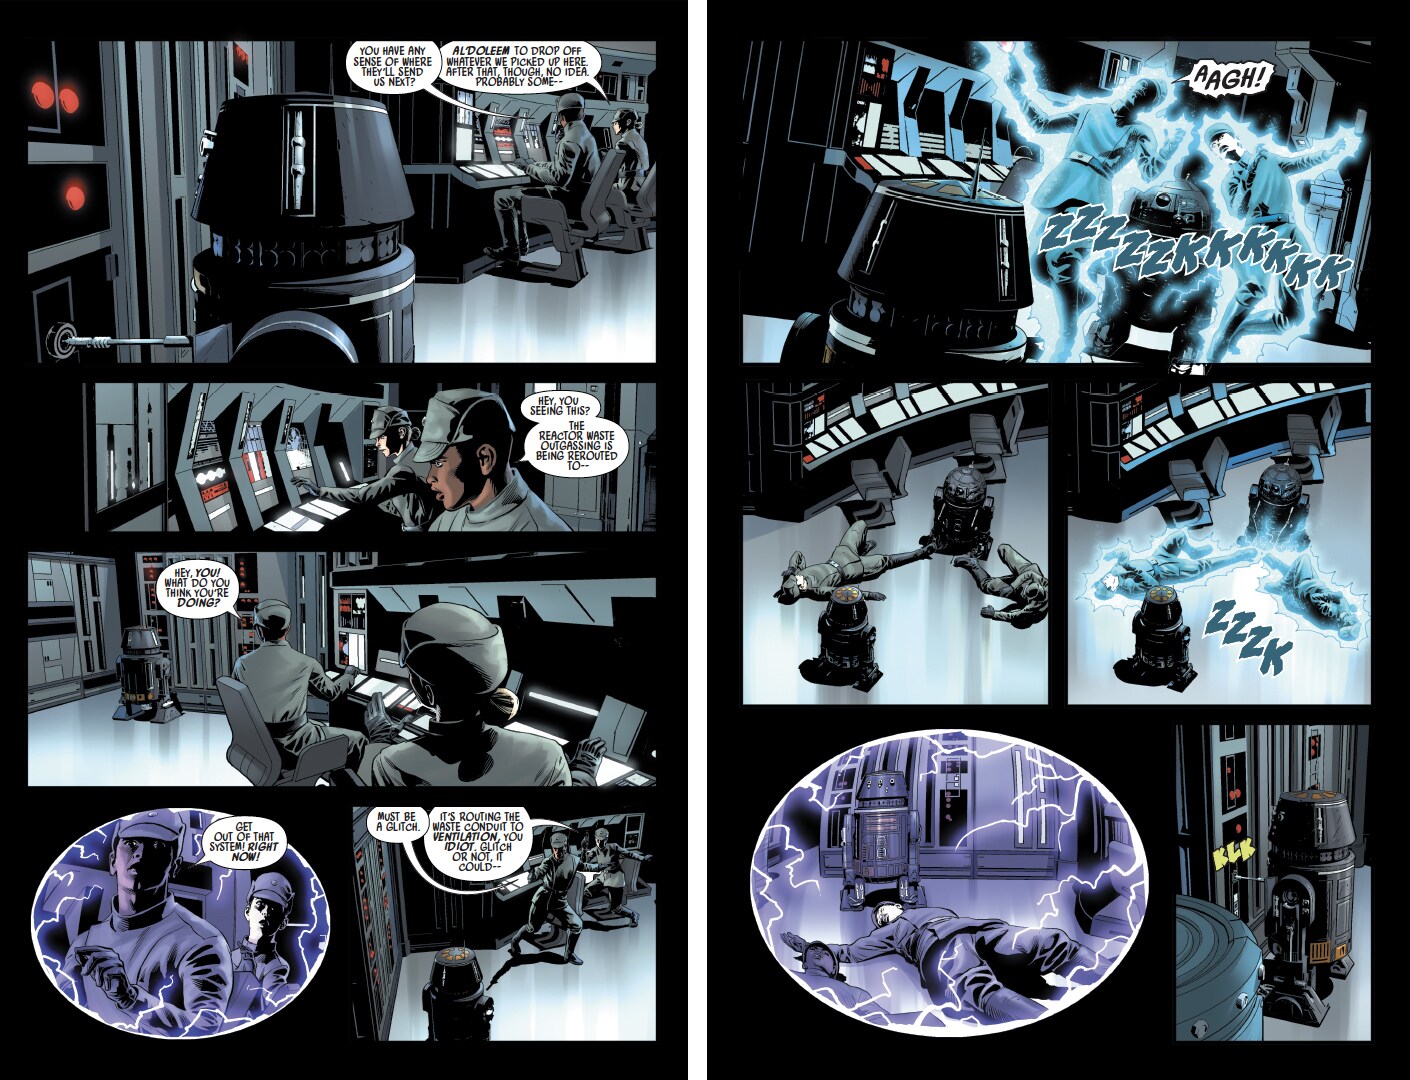 Star Wars: Dark Droids page 5 and 6